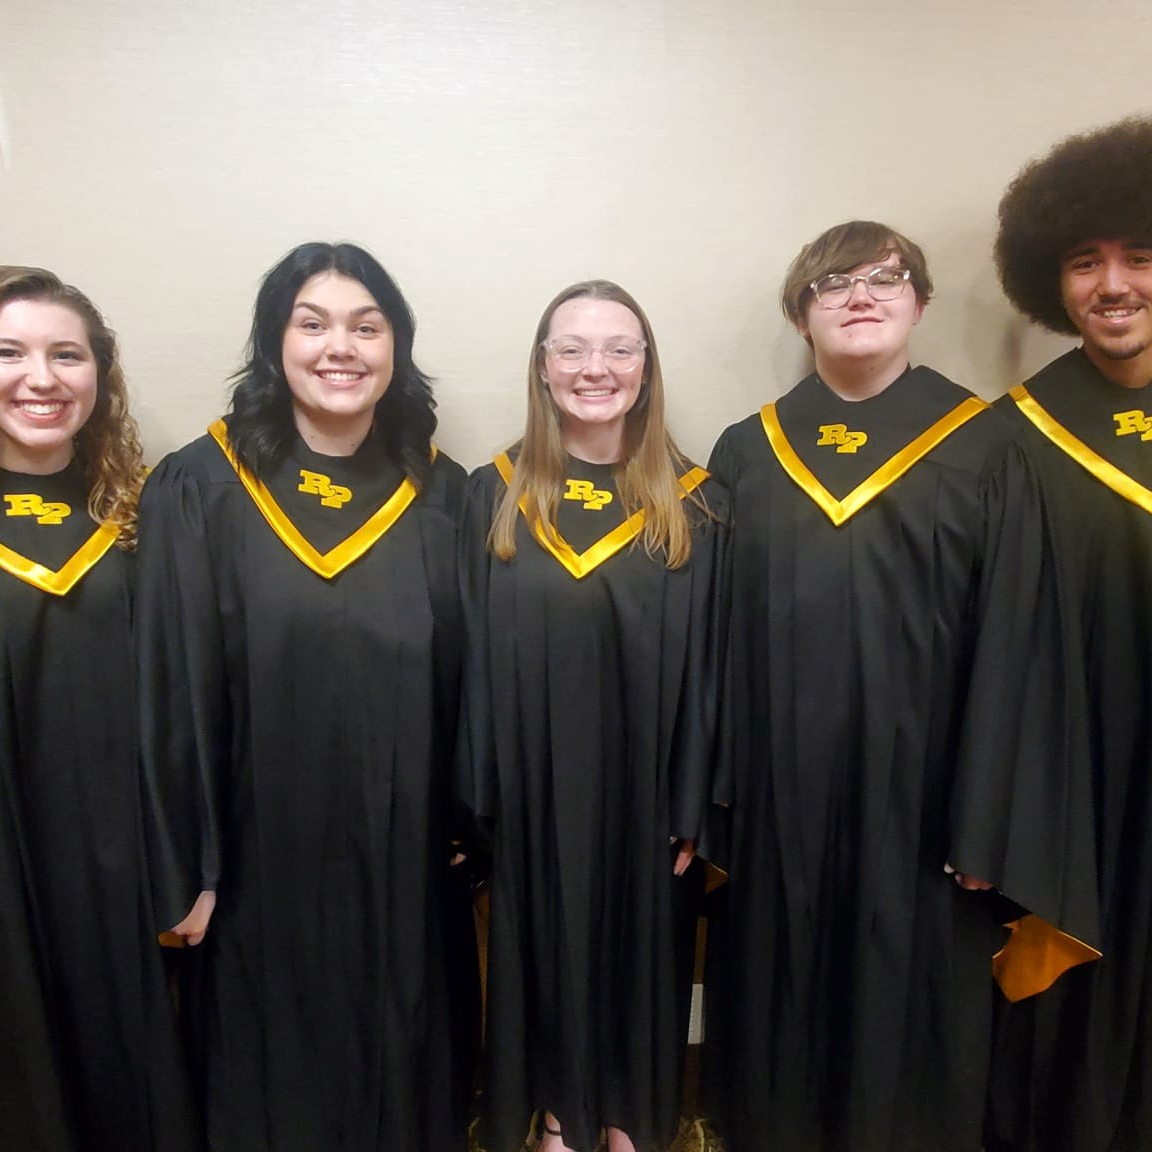 Five RPHS students participated in the Missouri All-State Choir. From Left: Jillian Collom, Hannah Moroney, Bailey Roe, Dalton Ballinger and Xander Blackmon (2-year member).